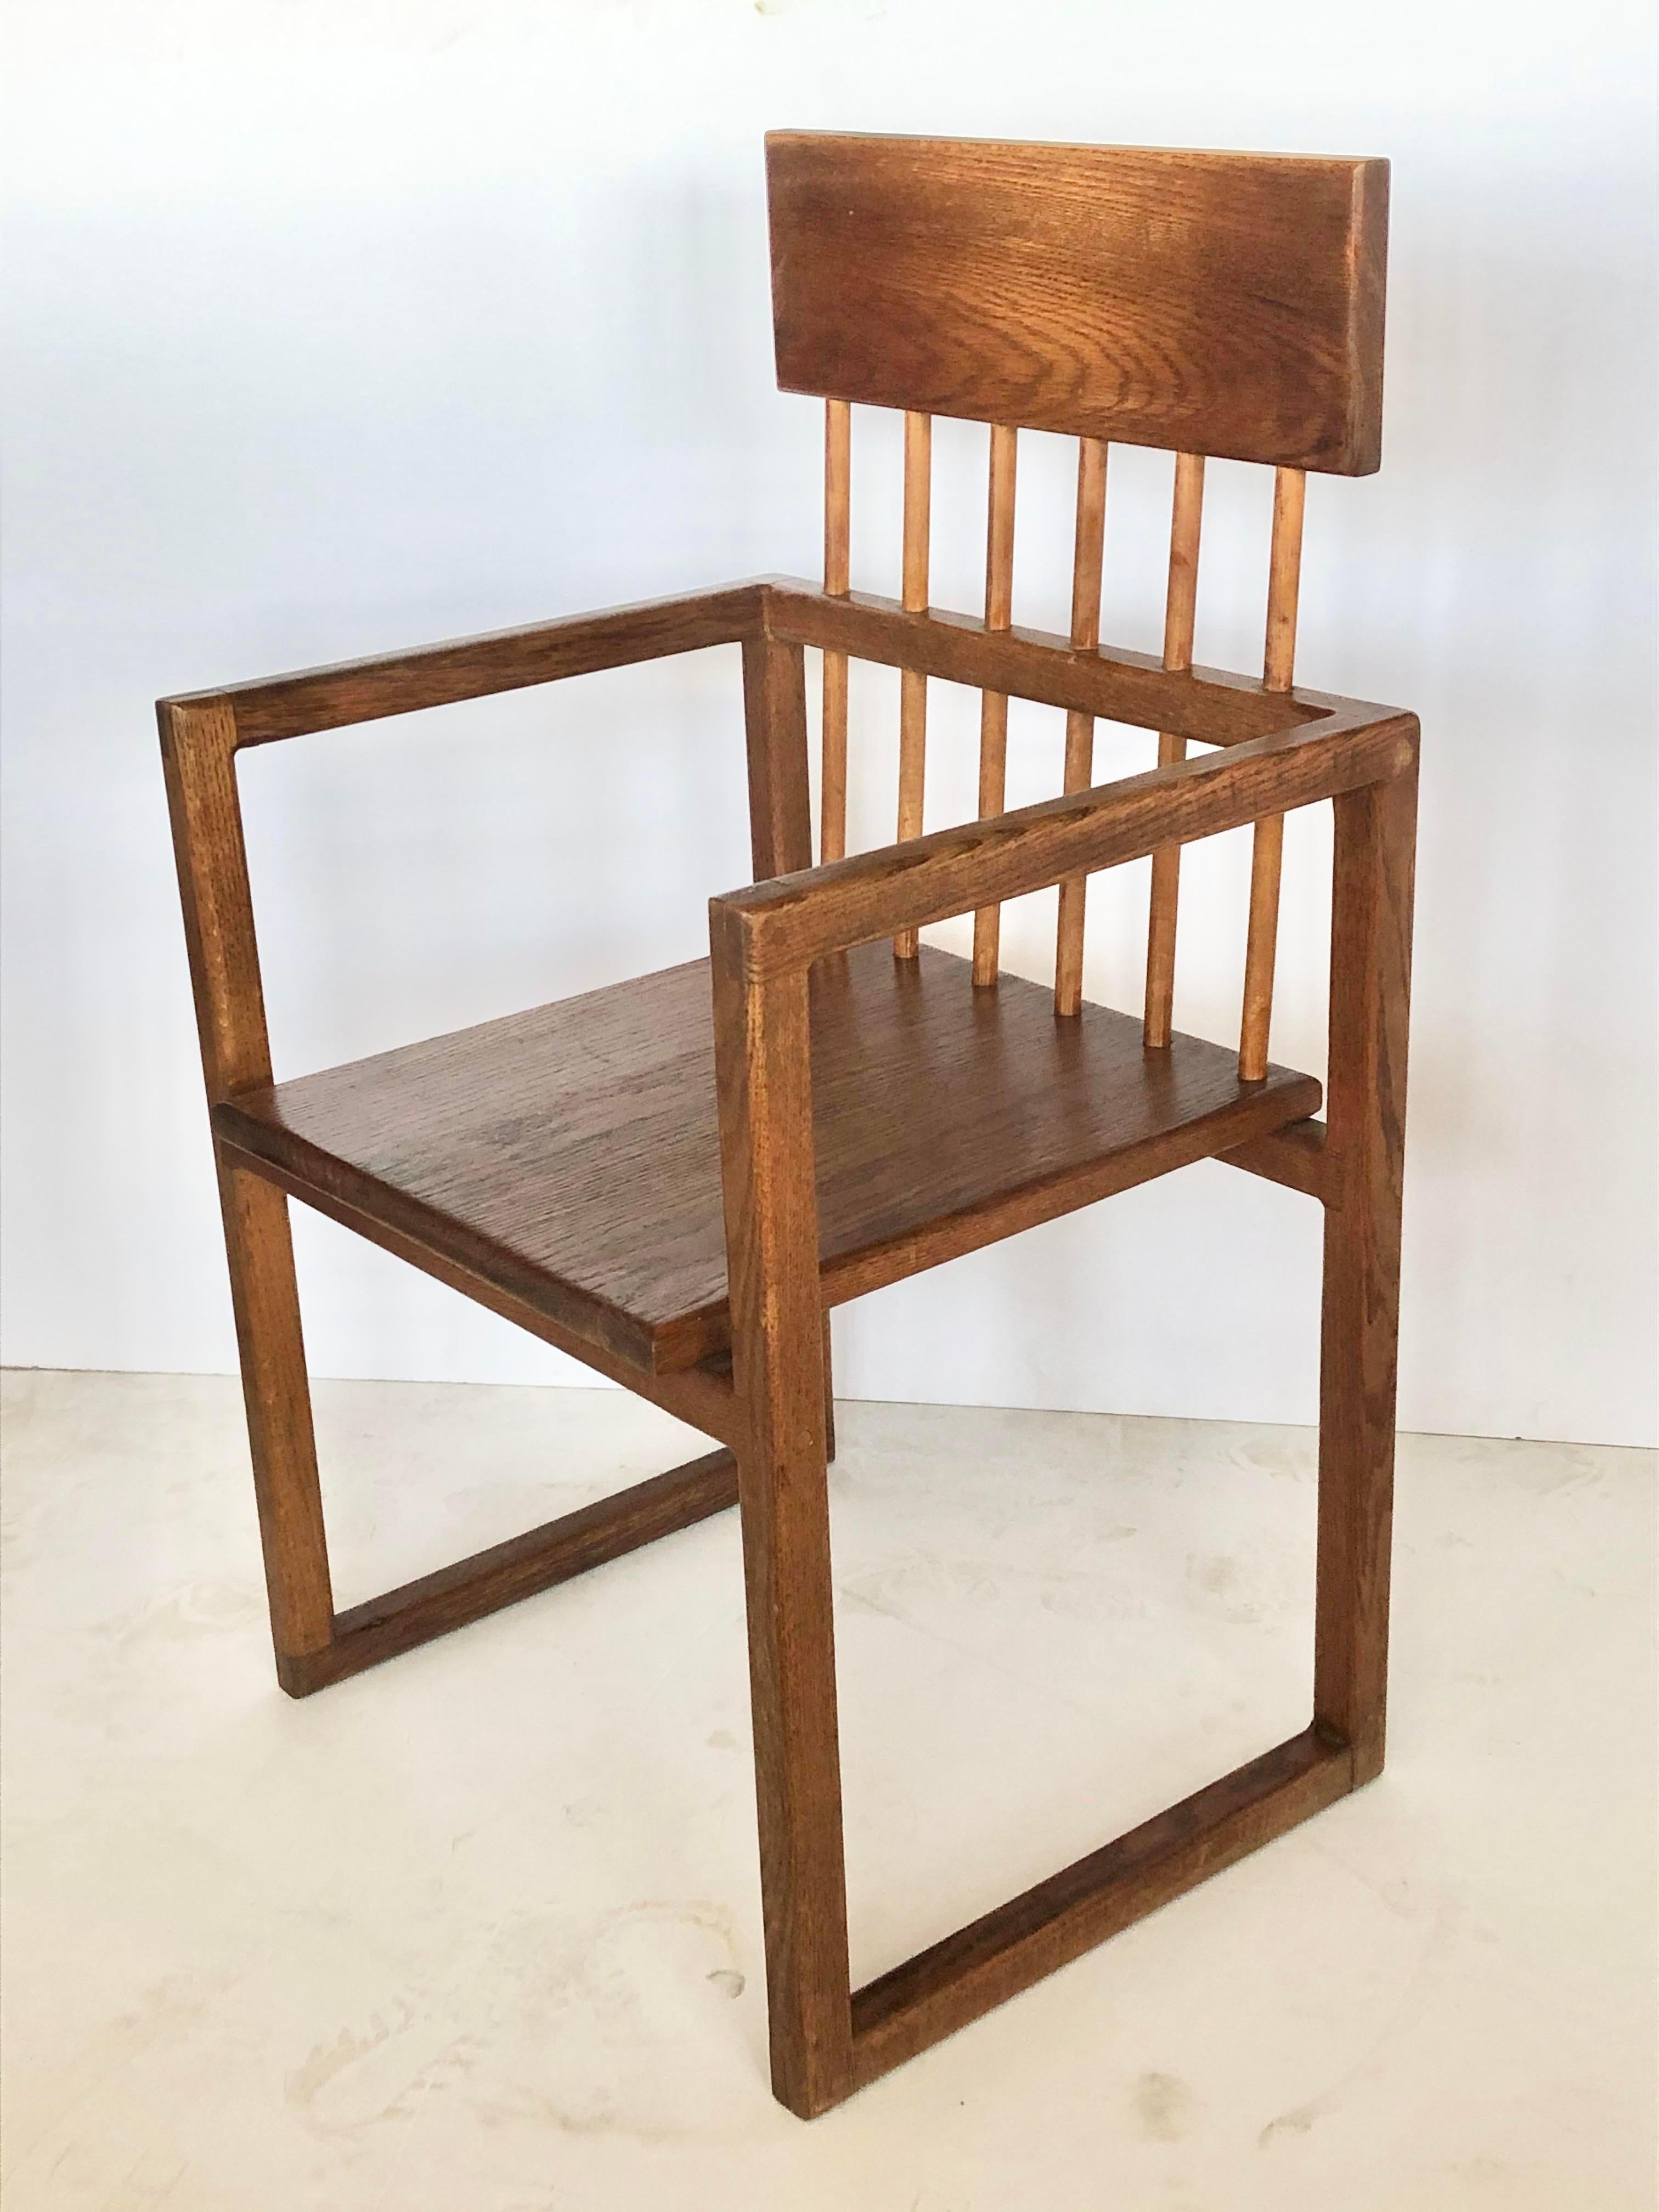 Midcentury handmade Art Studio Side Chair. We have two chairs available. 